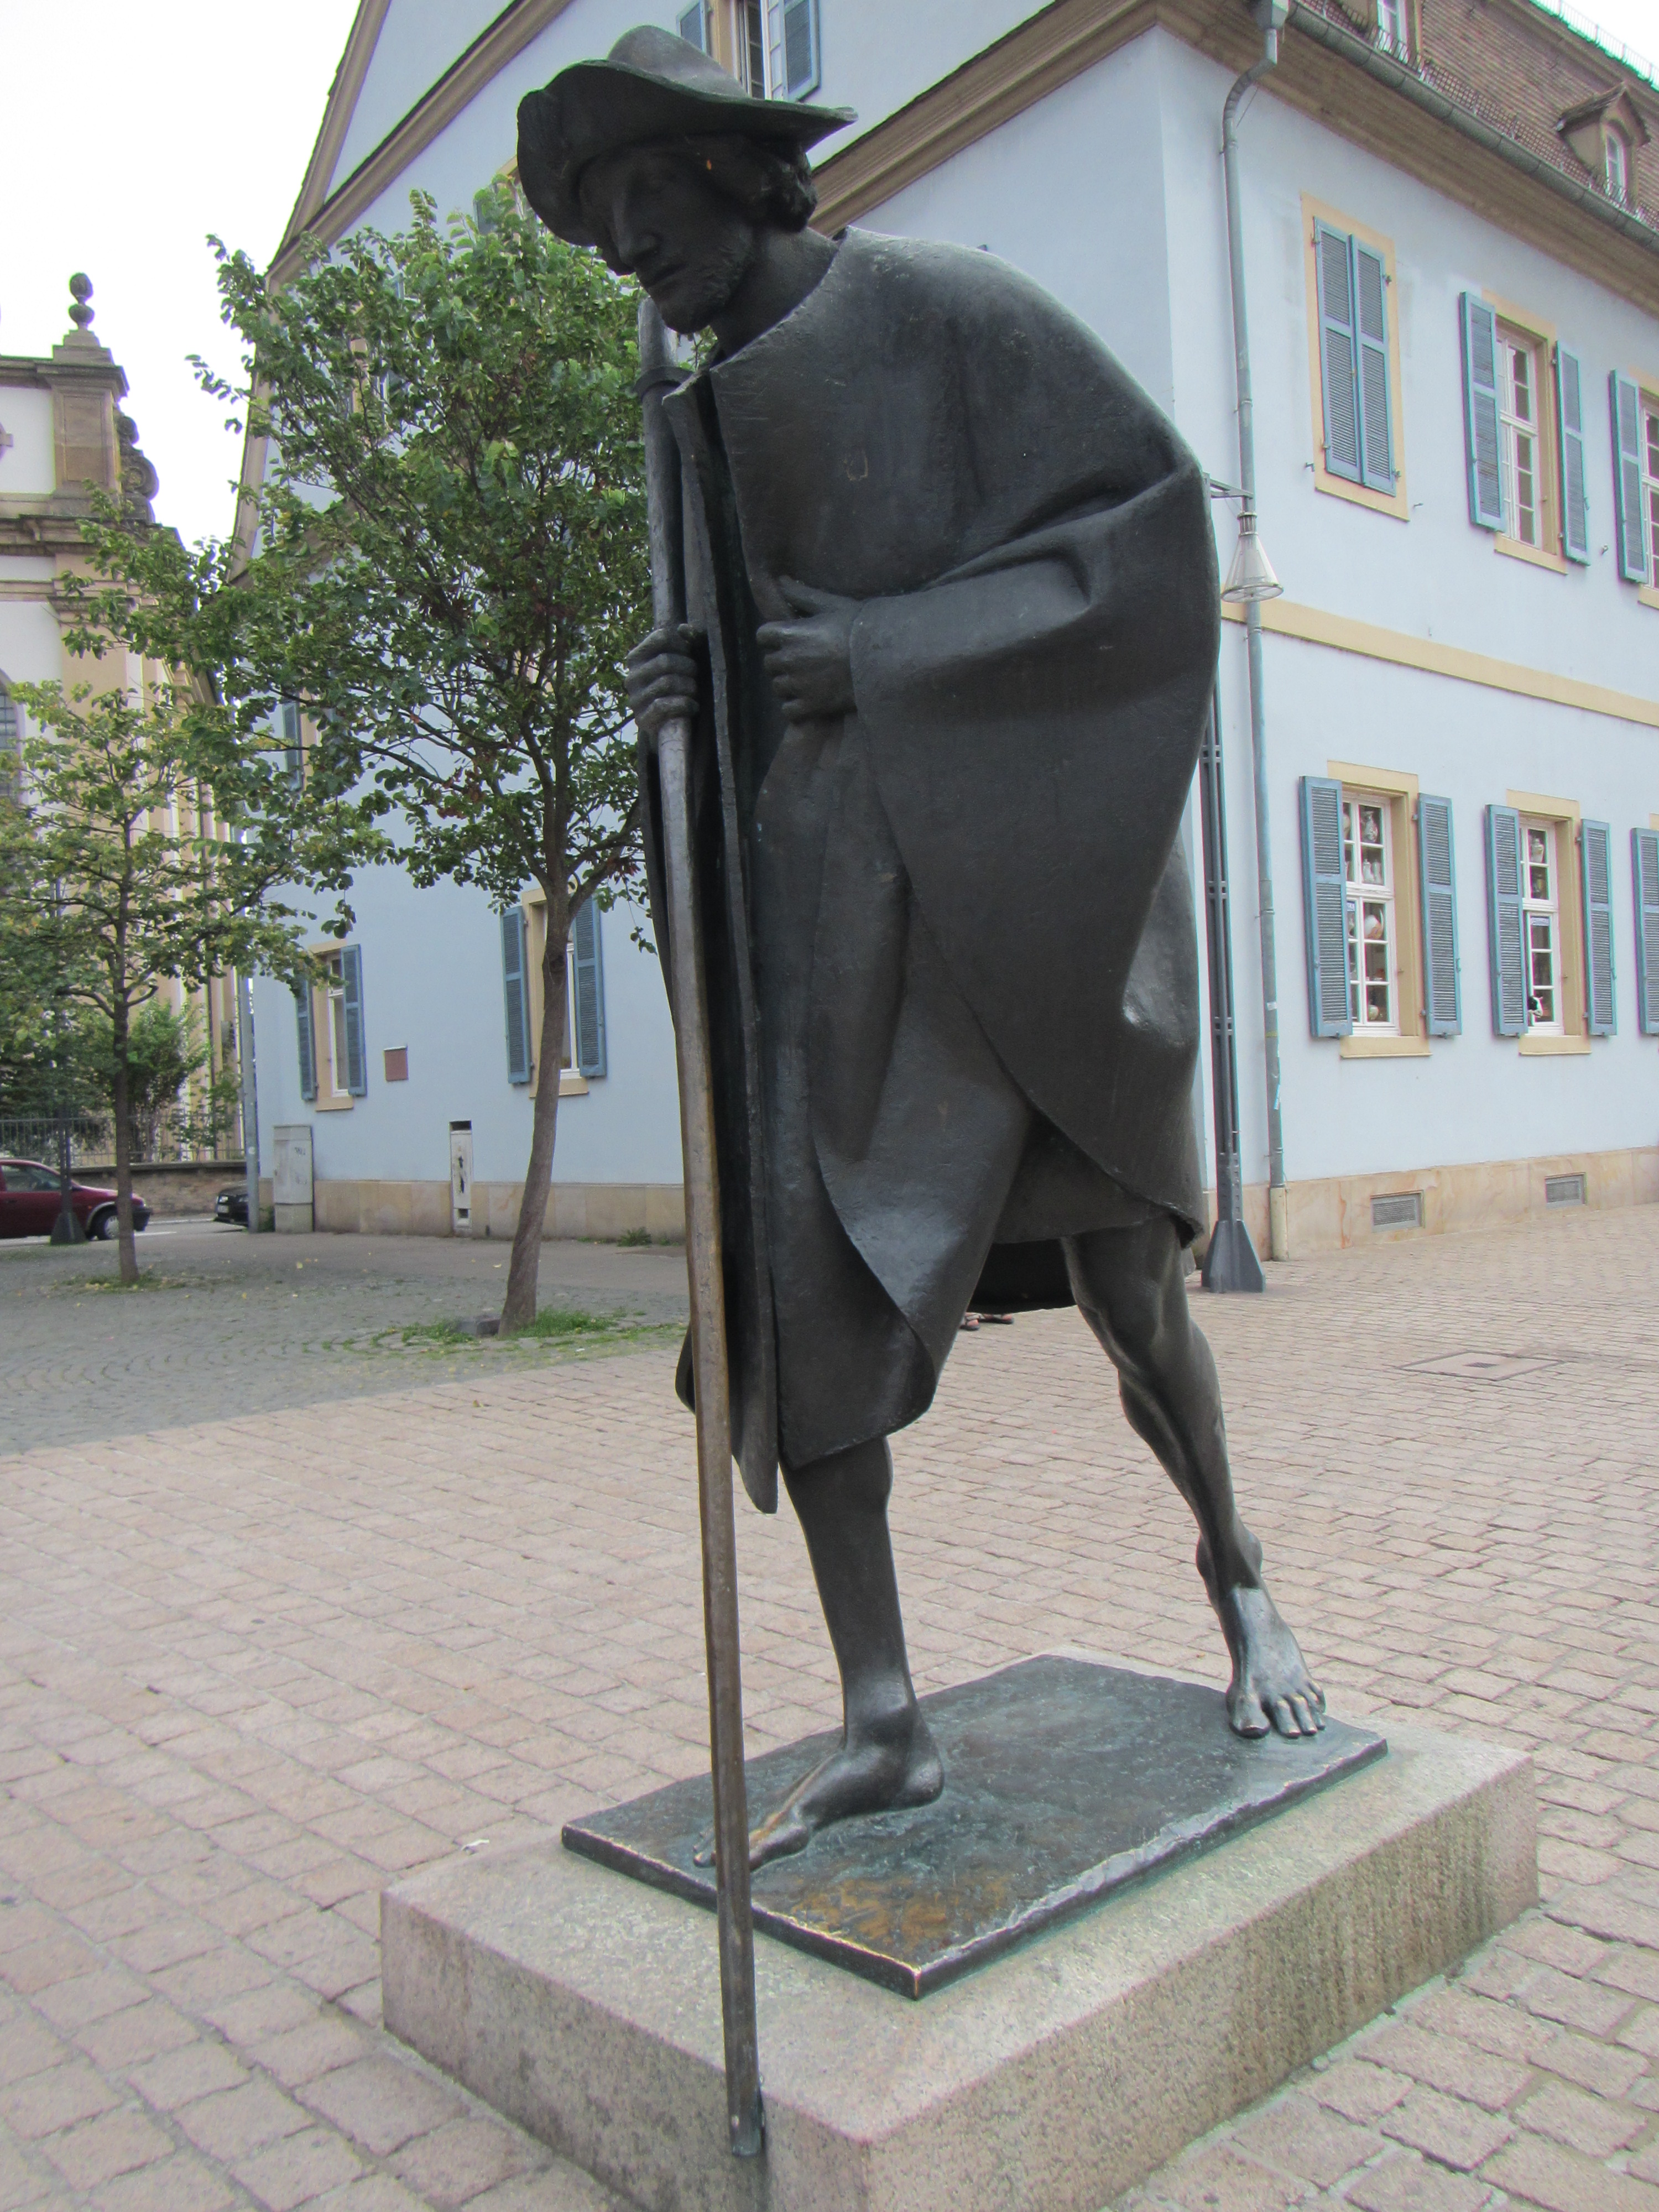 Photo of the pilgrim statue near the Cathedral in Speyer, Germany.